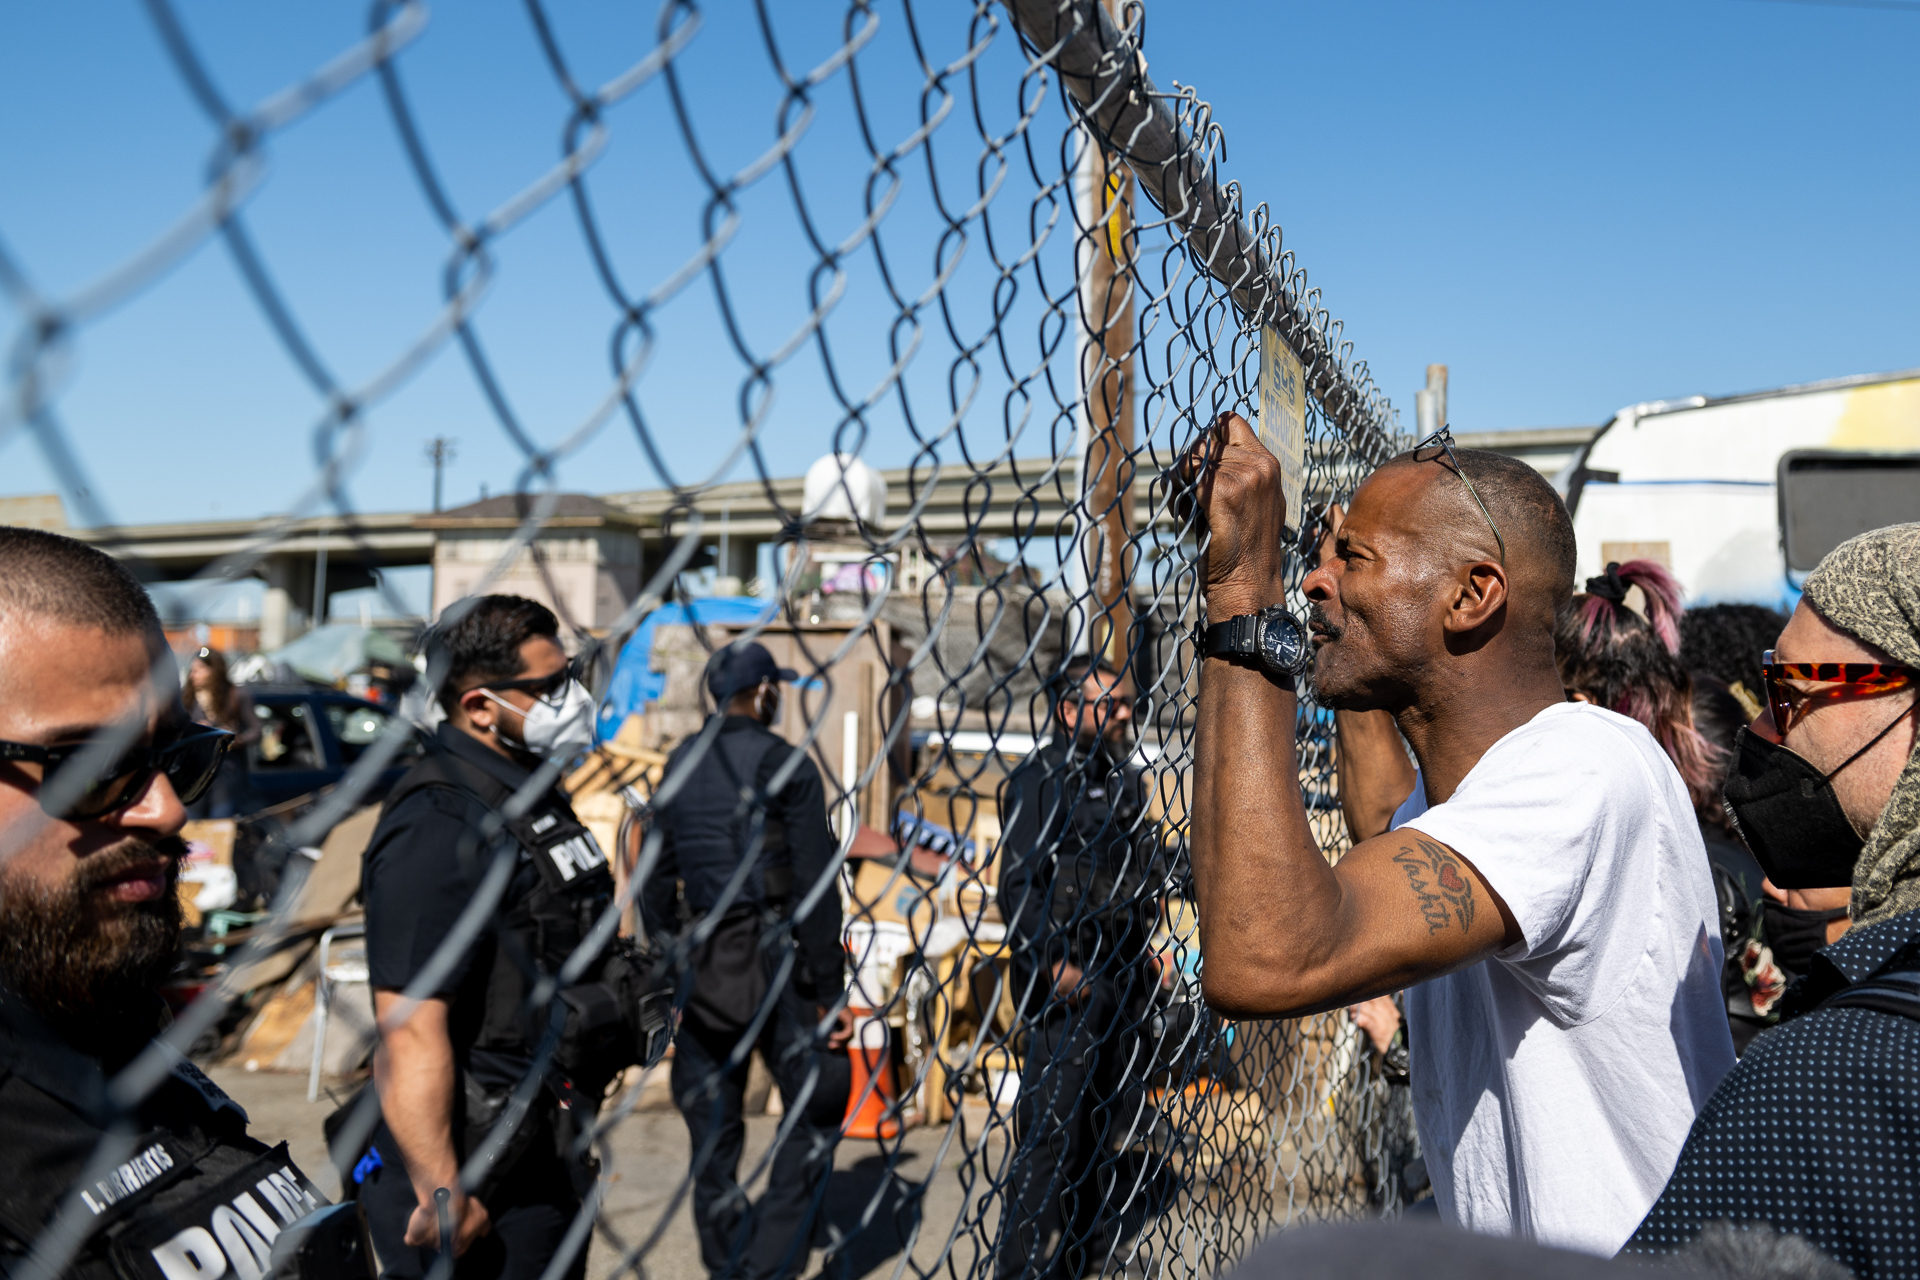 A Black man looks through a chain link fence at police officers on the other side of it. The man has a crowd of people behind him as his fingers rest in between the fence coils.